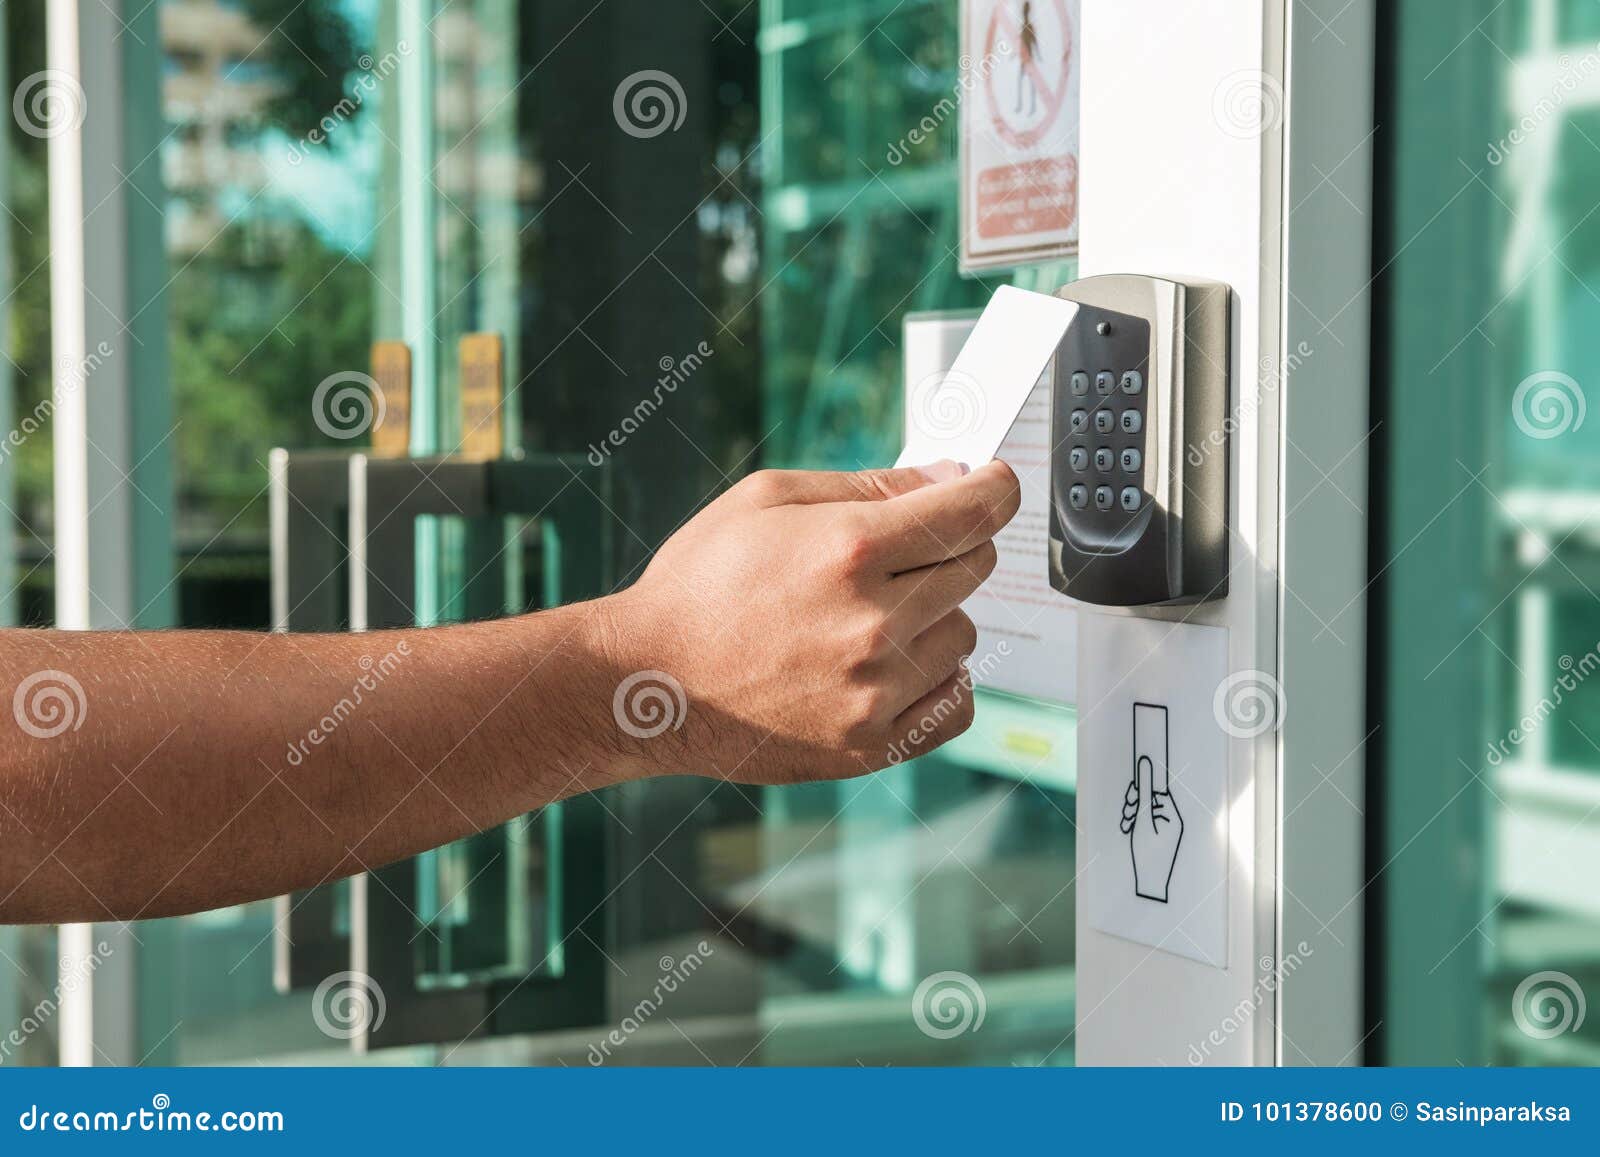 hand using security key card scanning to open the door to entering private building. home and building security system